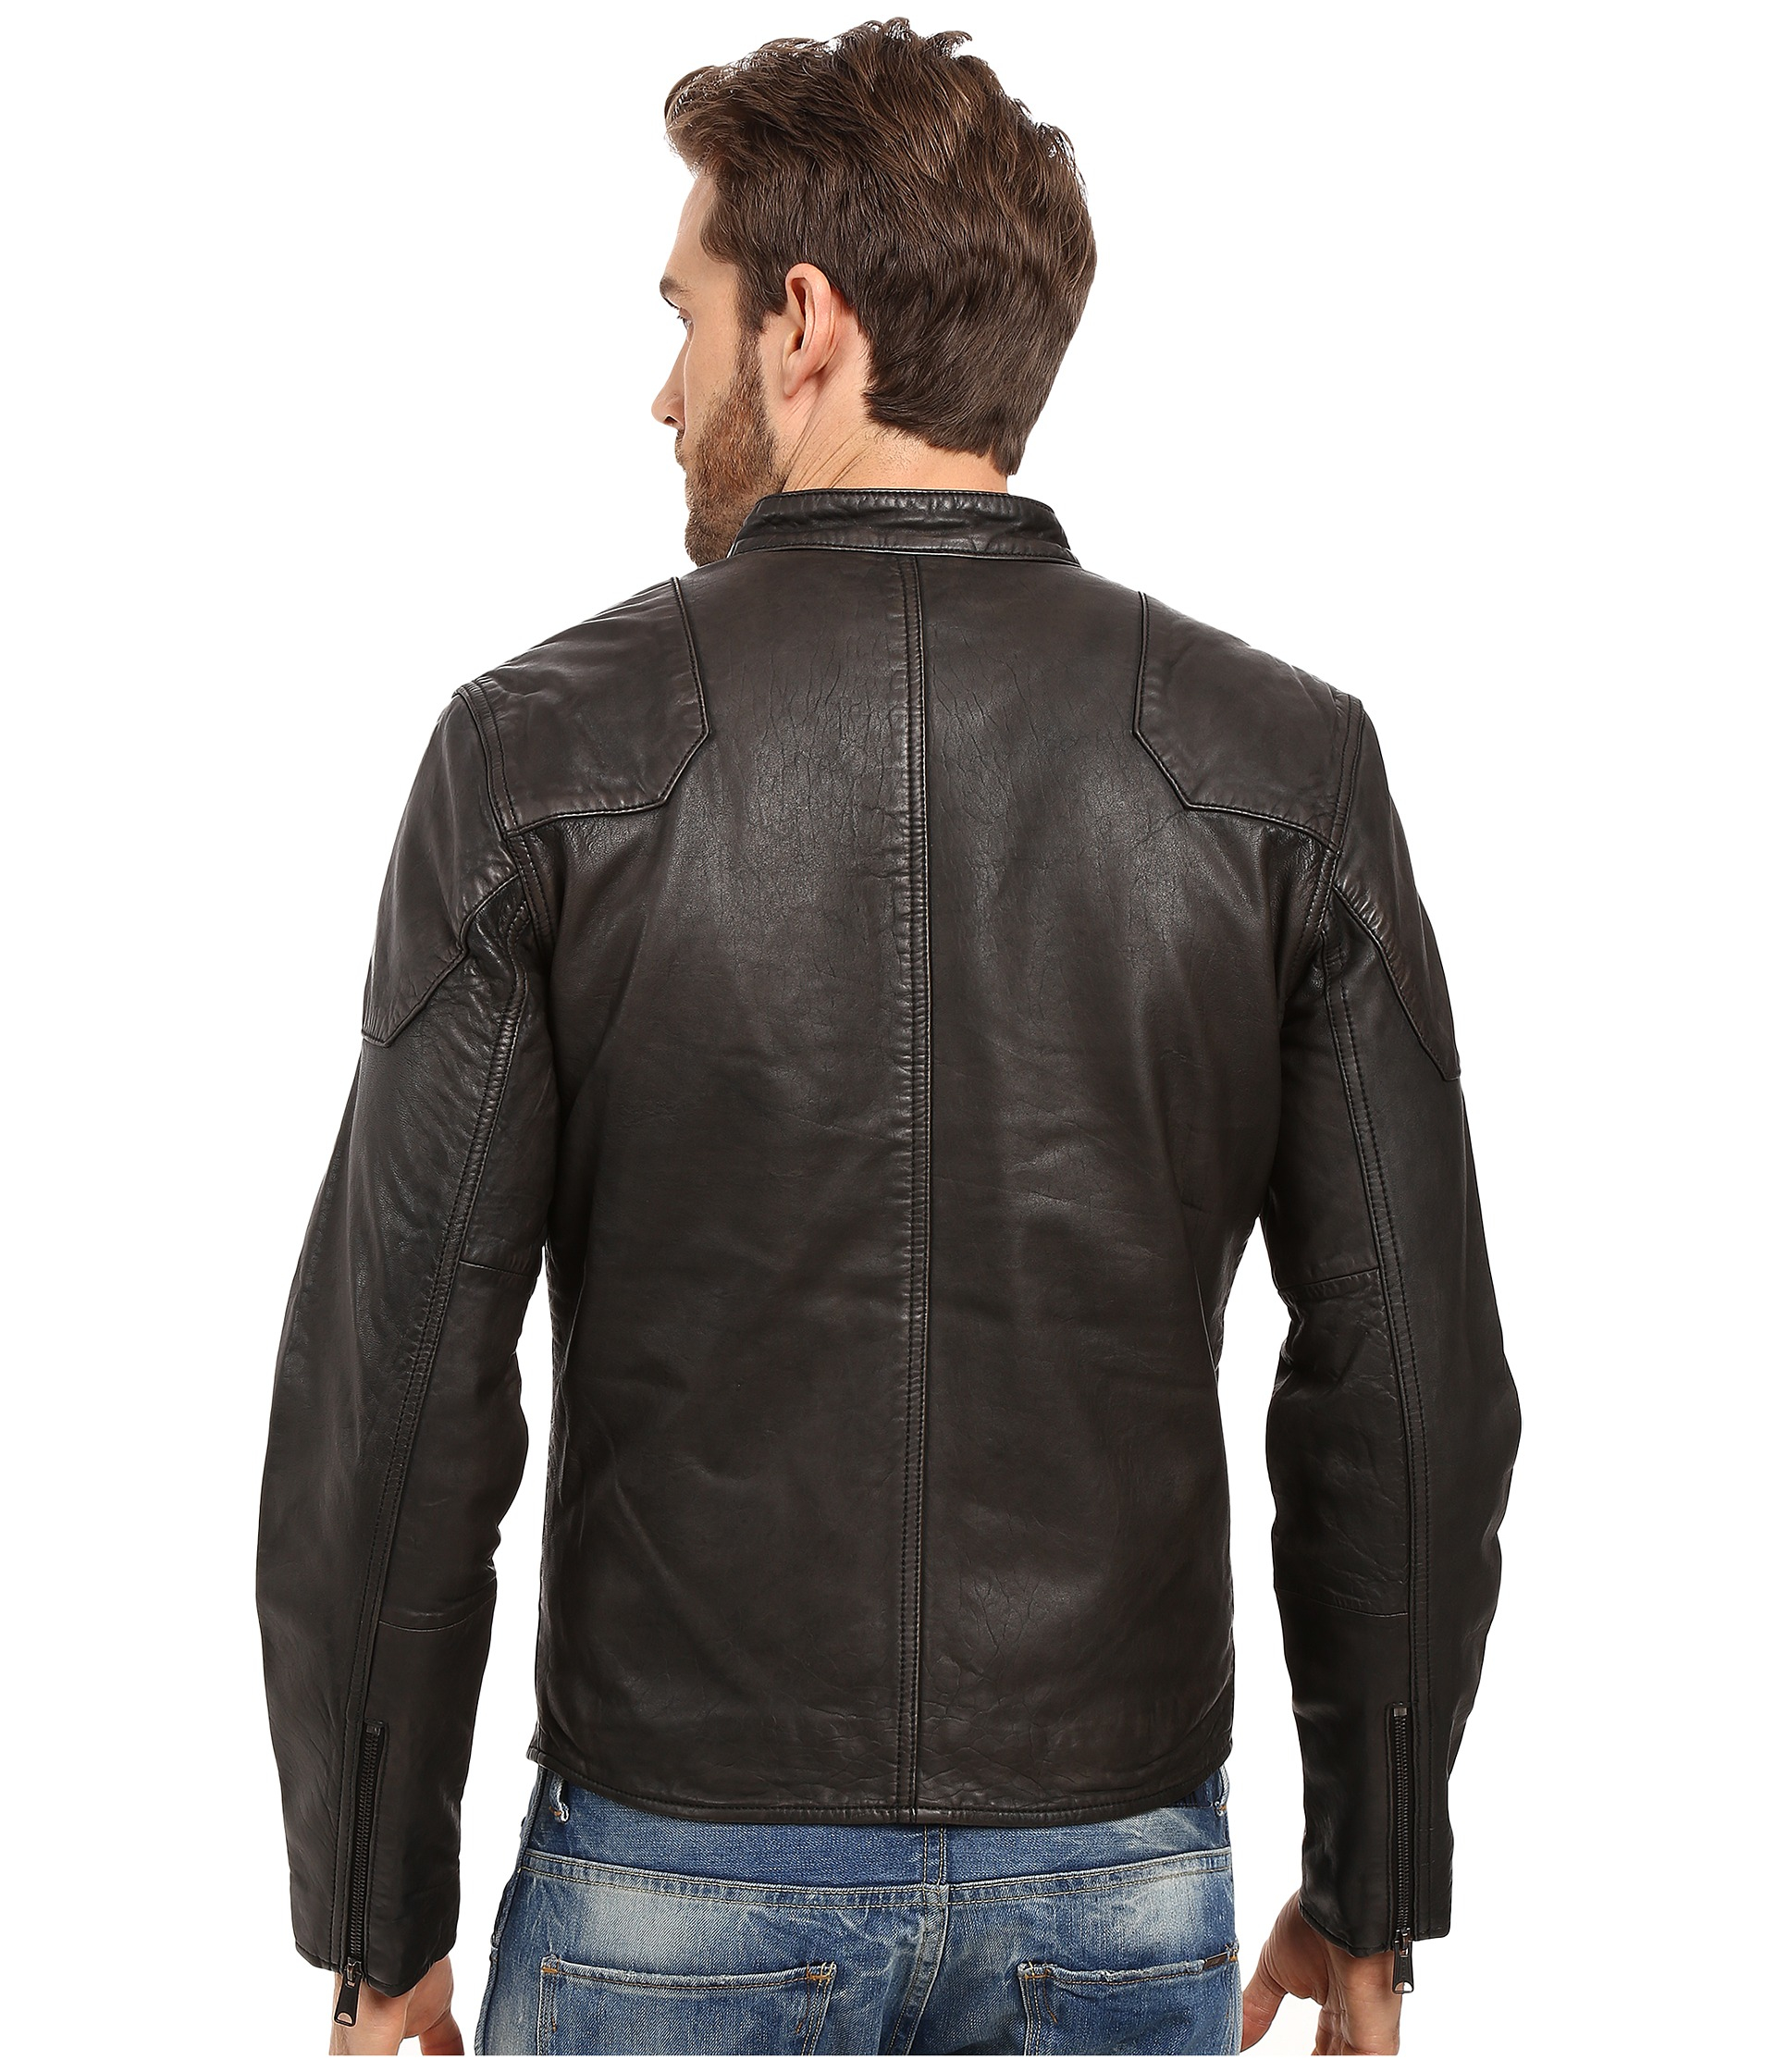 Lyst - Lucky Brand Thruxton Leather Jacket in Black for Men